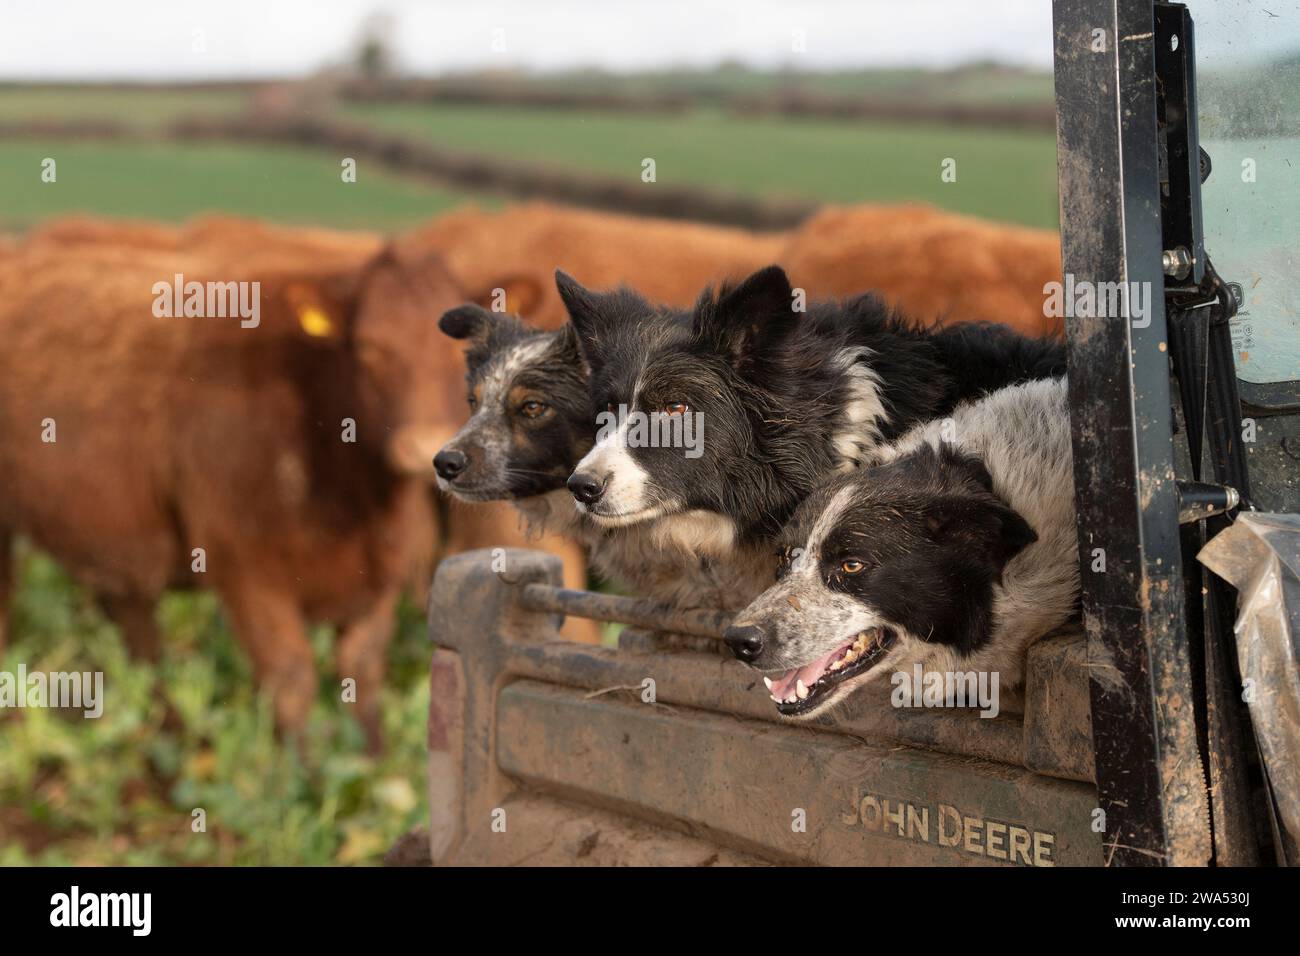 sheepdog, collies in a gator with cattle behind Stock Photo